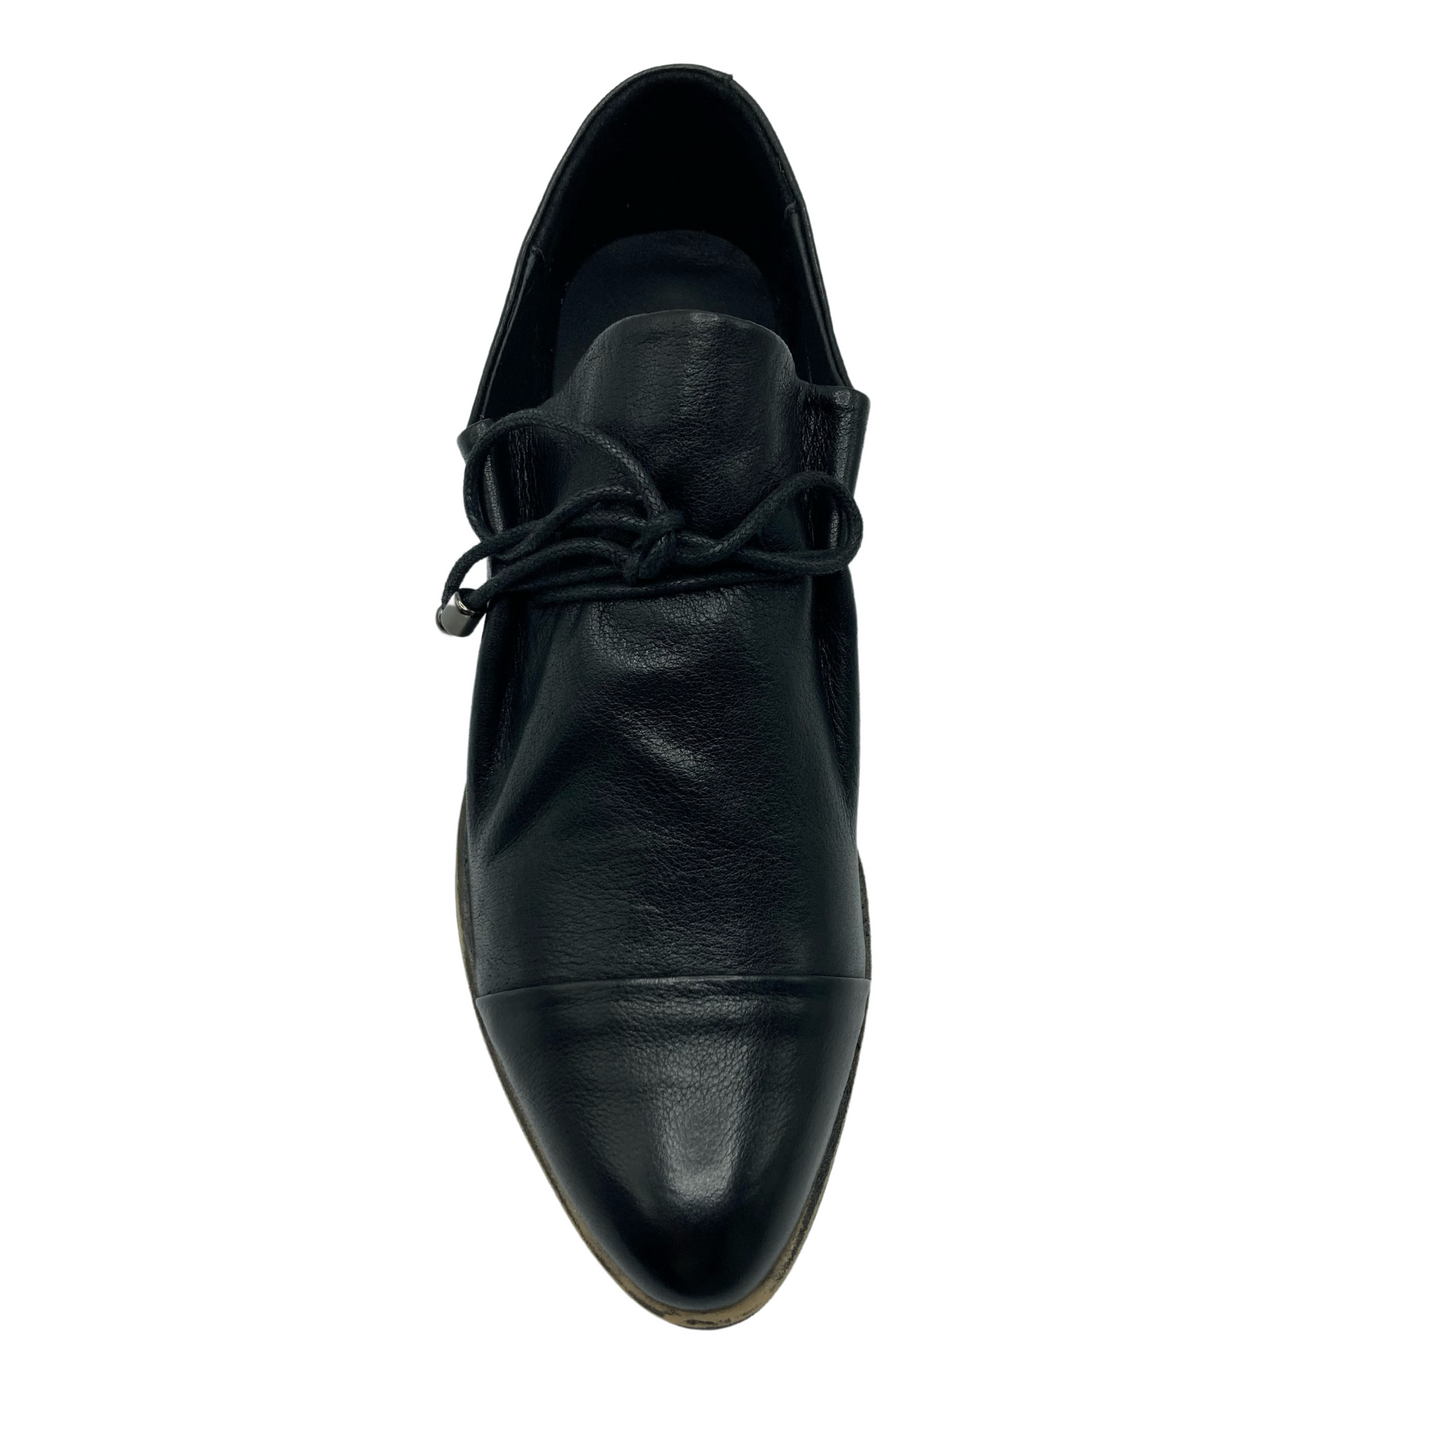 Top view of black leather shoe with pointed toe and black laces